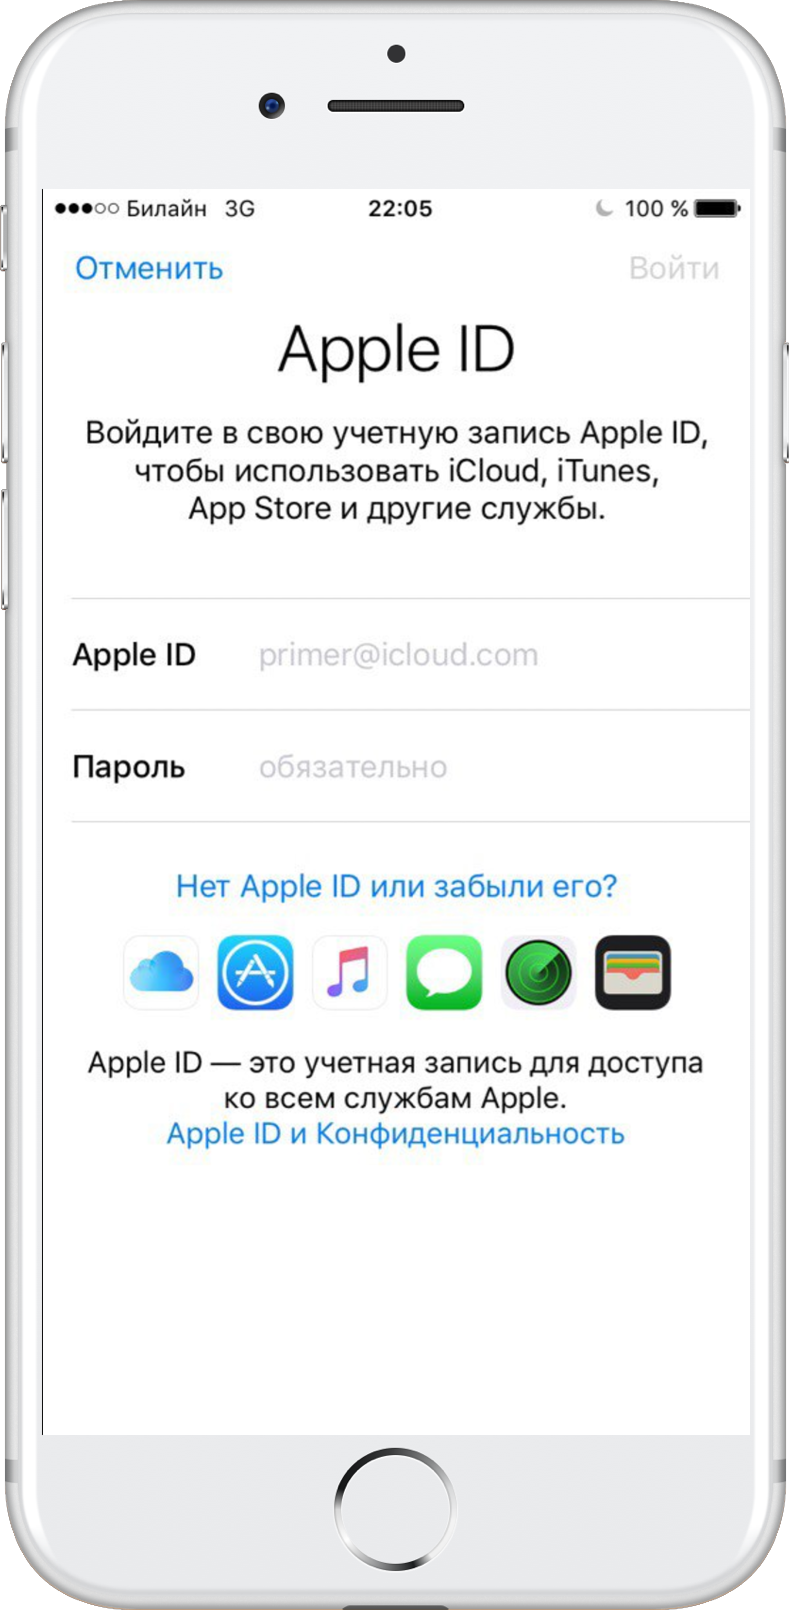 How to create a new account Apple ID to iPhone or iPad without a credit card